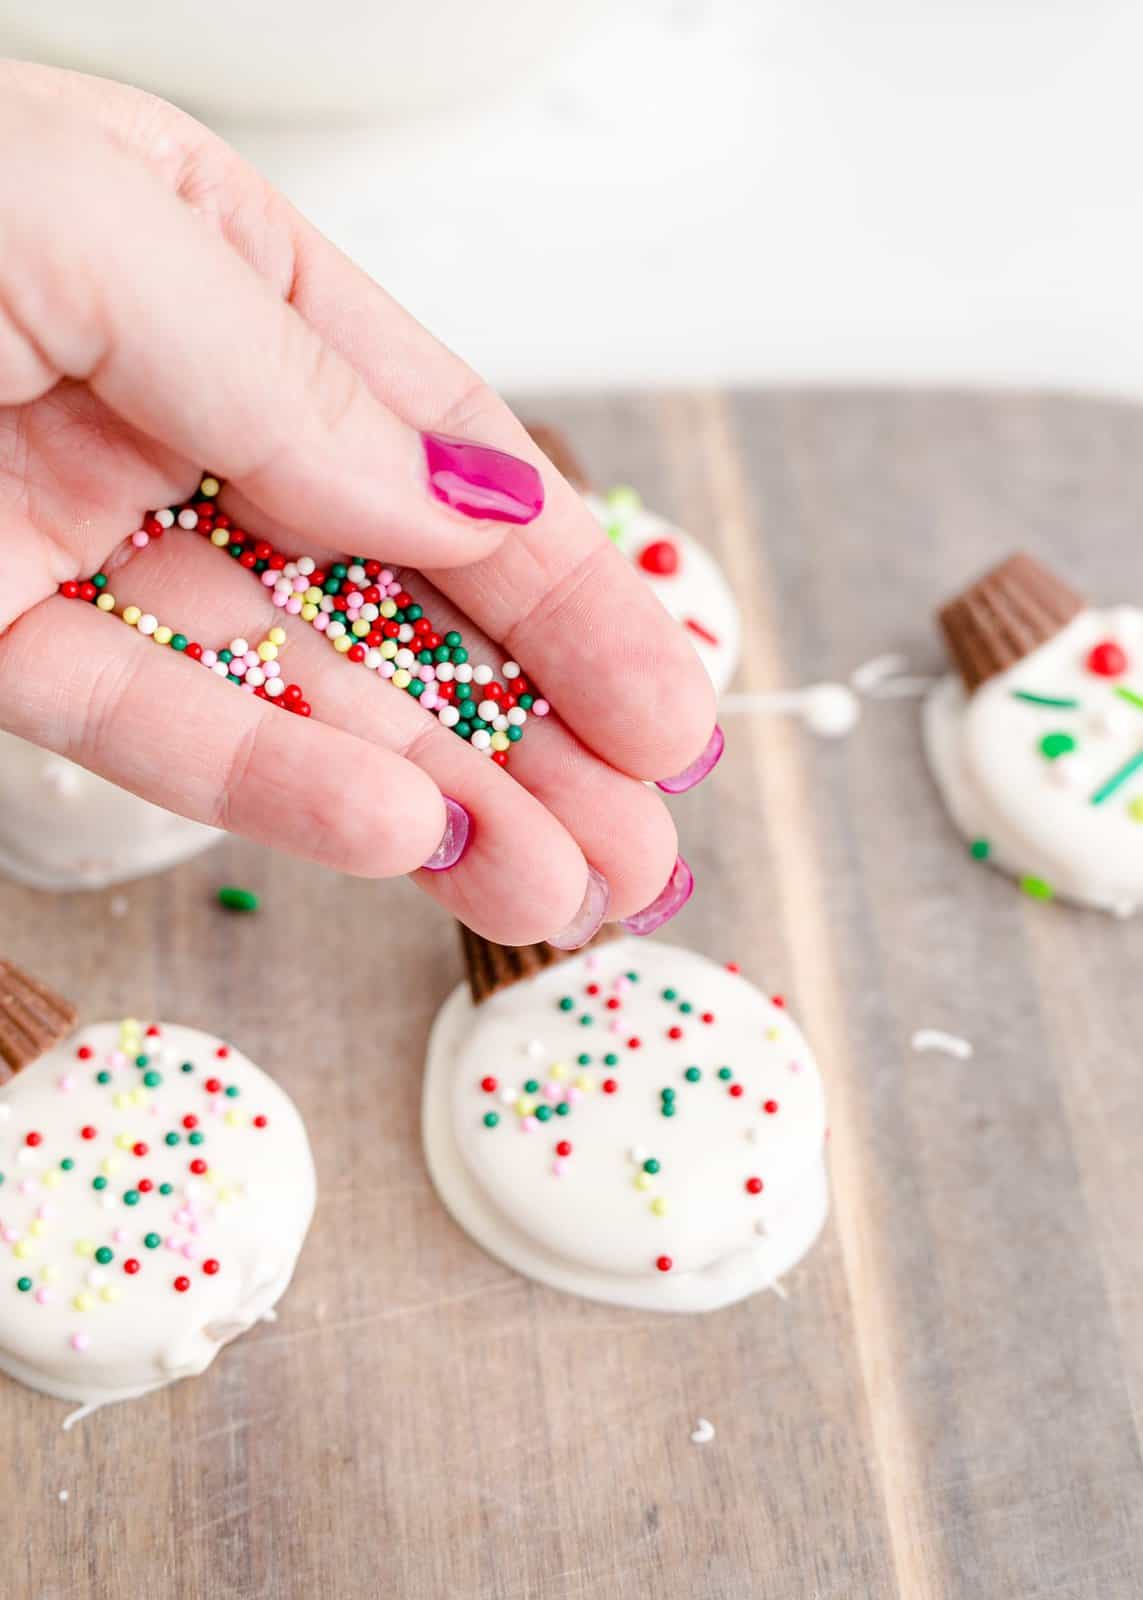 Sprinkles being added to the tops of the dipped crackers.